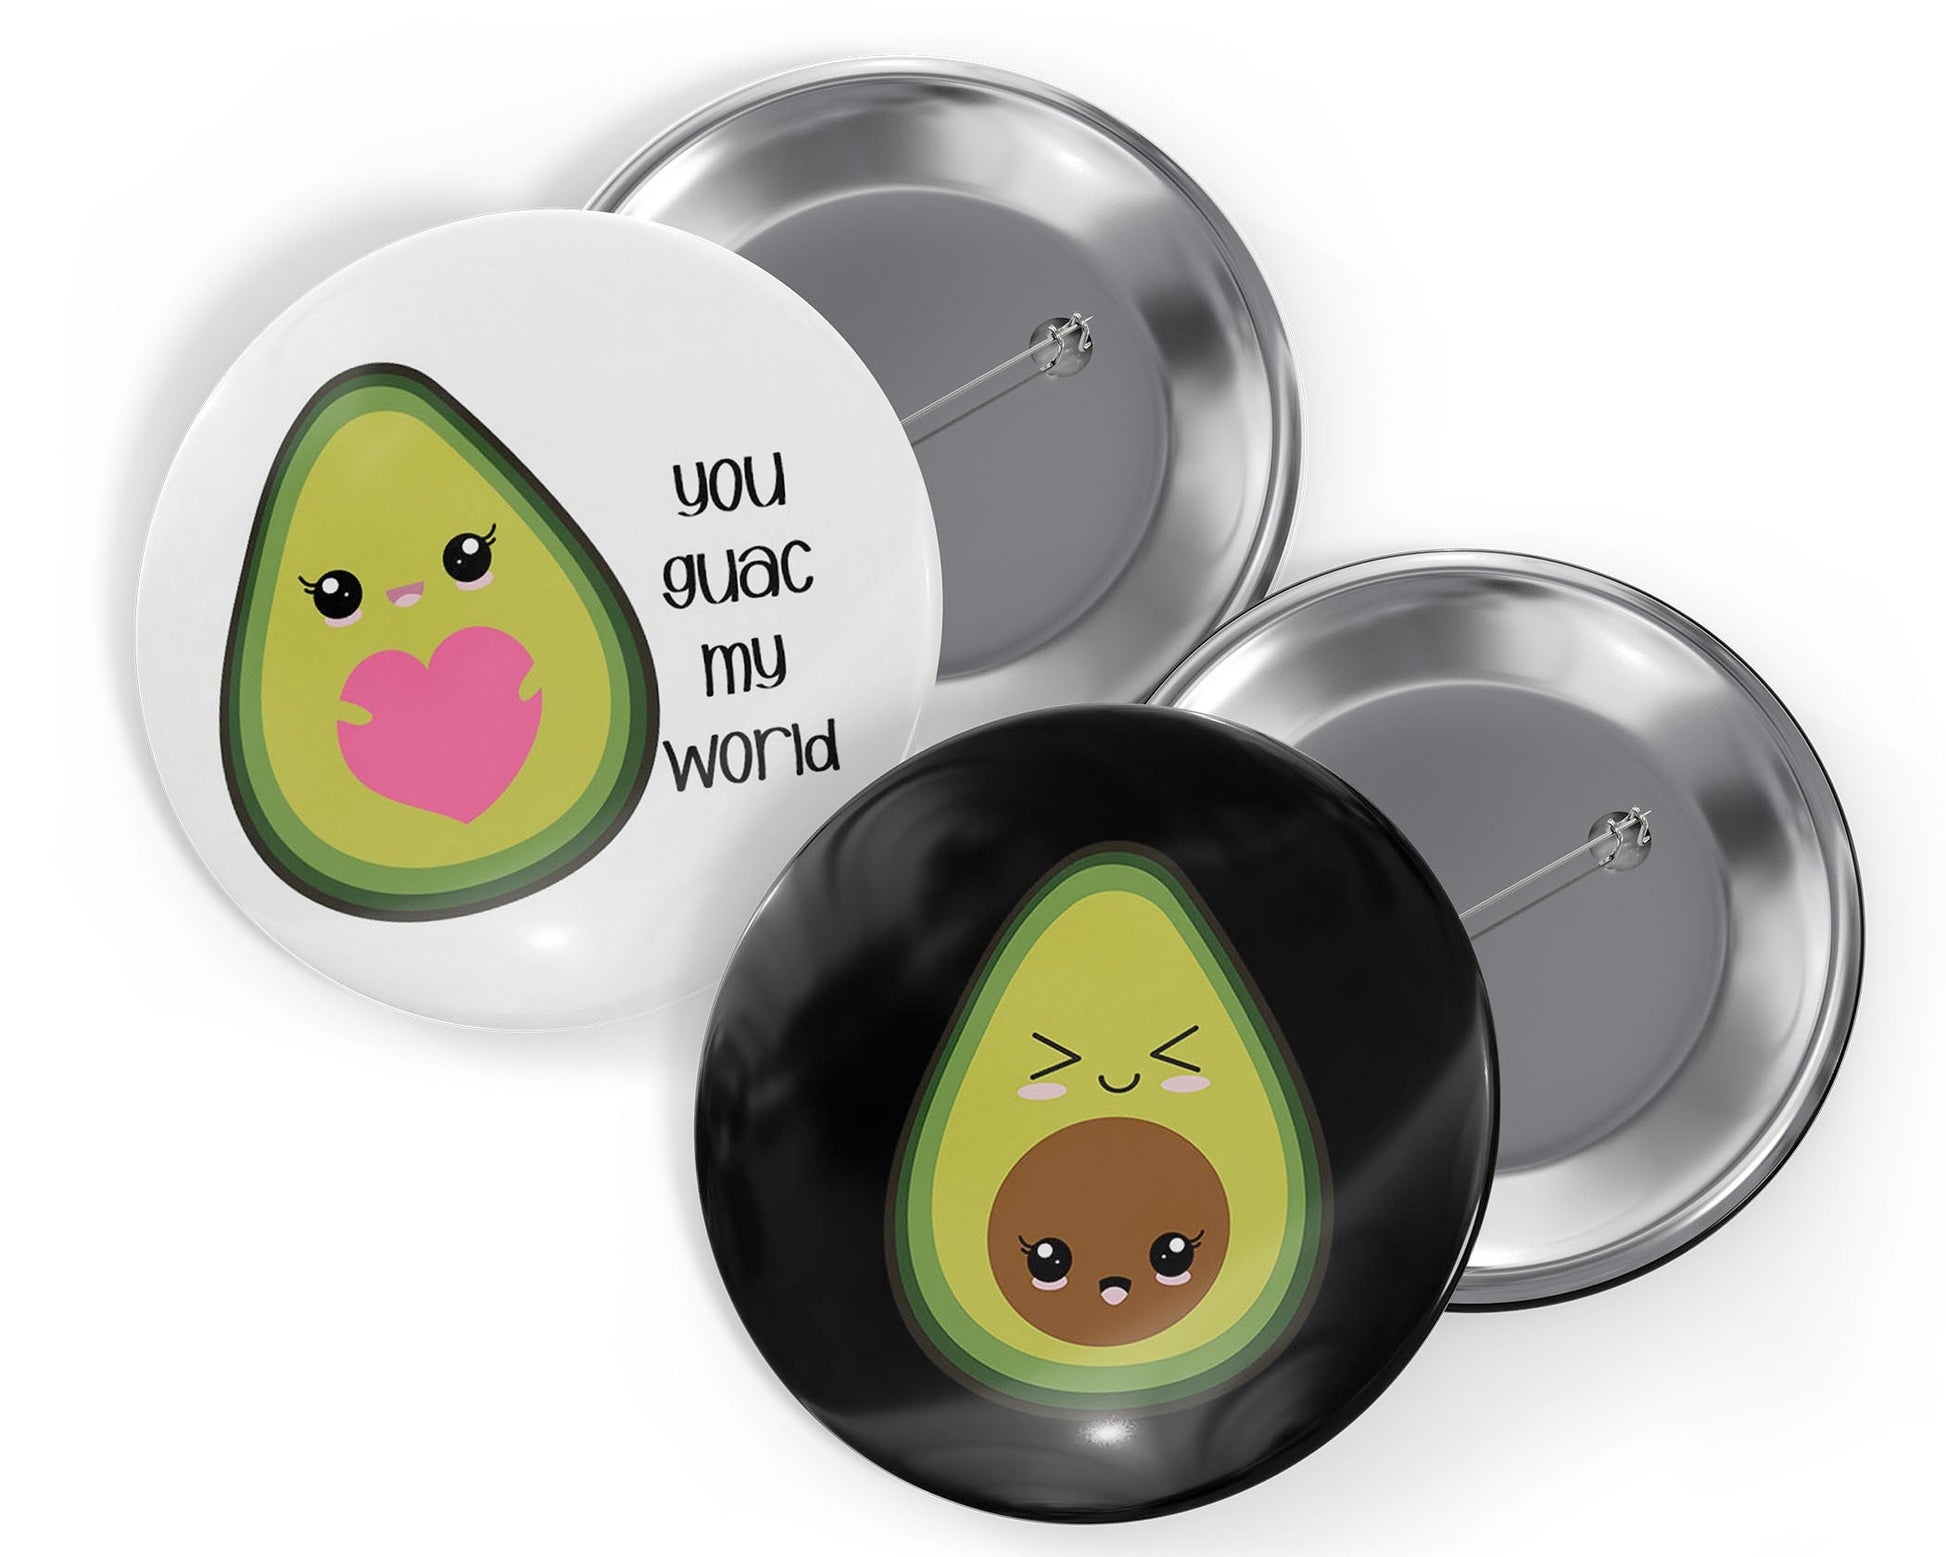 Sushi and Soy Sauce Pin, Japanese Inspired Cute Kawaii Button Pin Duo Pack 2.25"